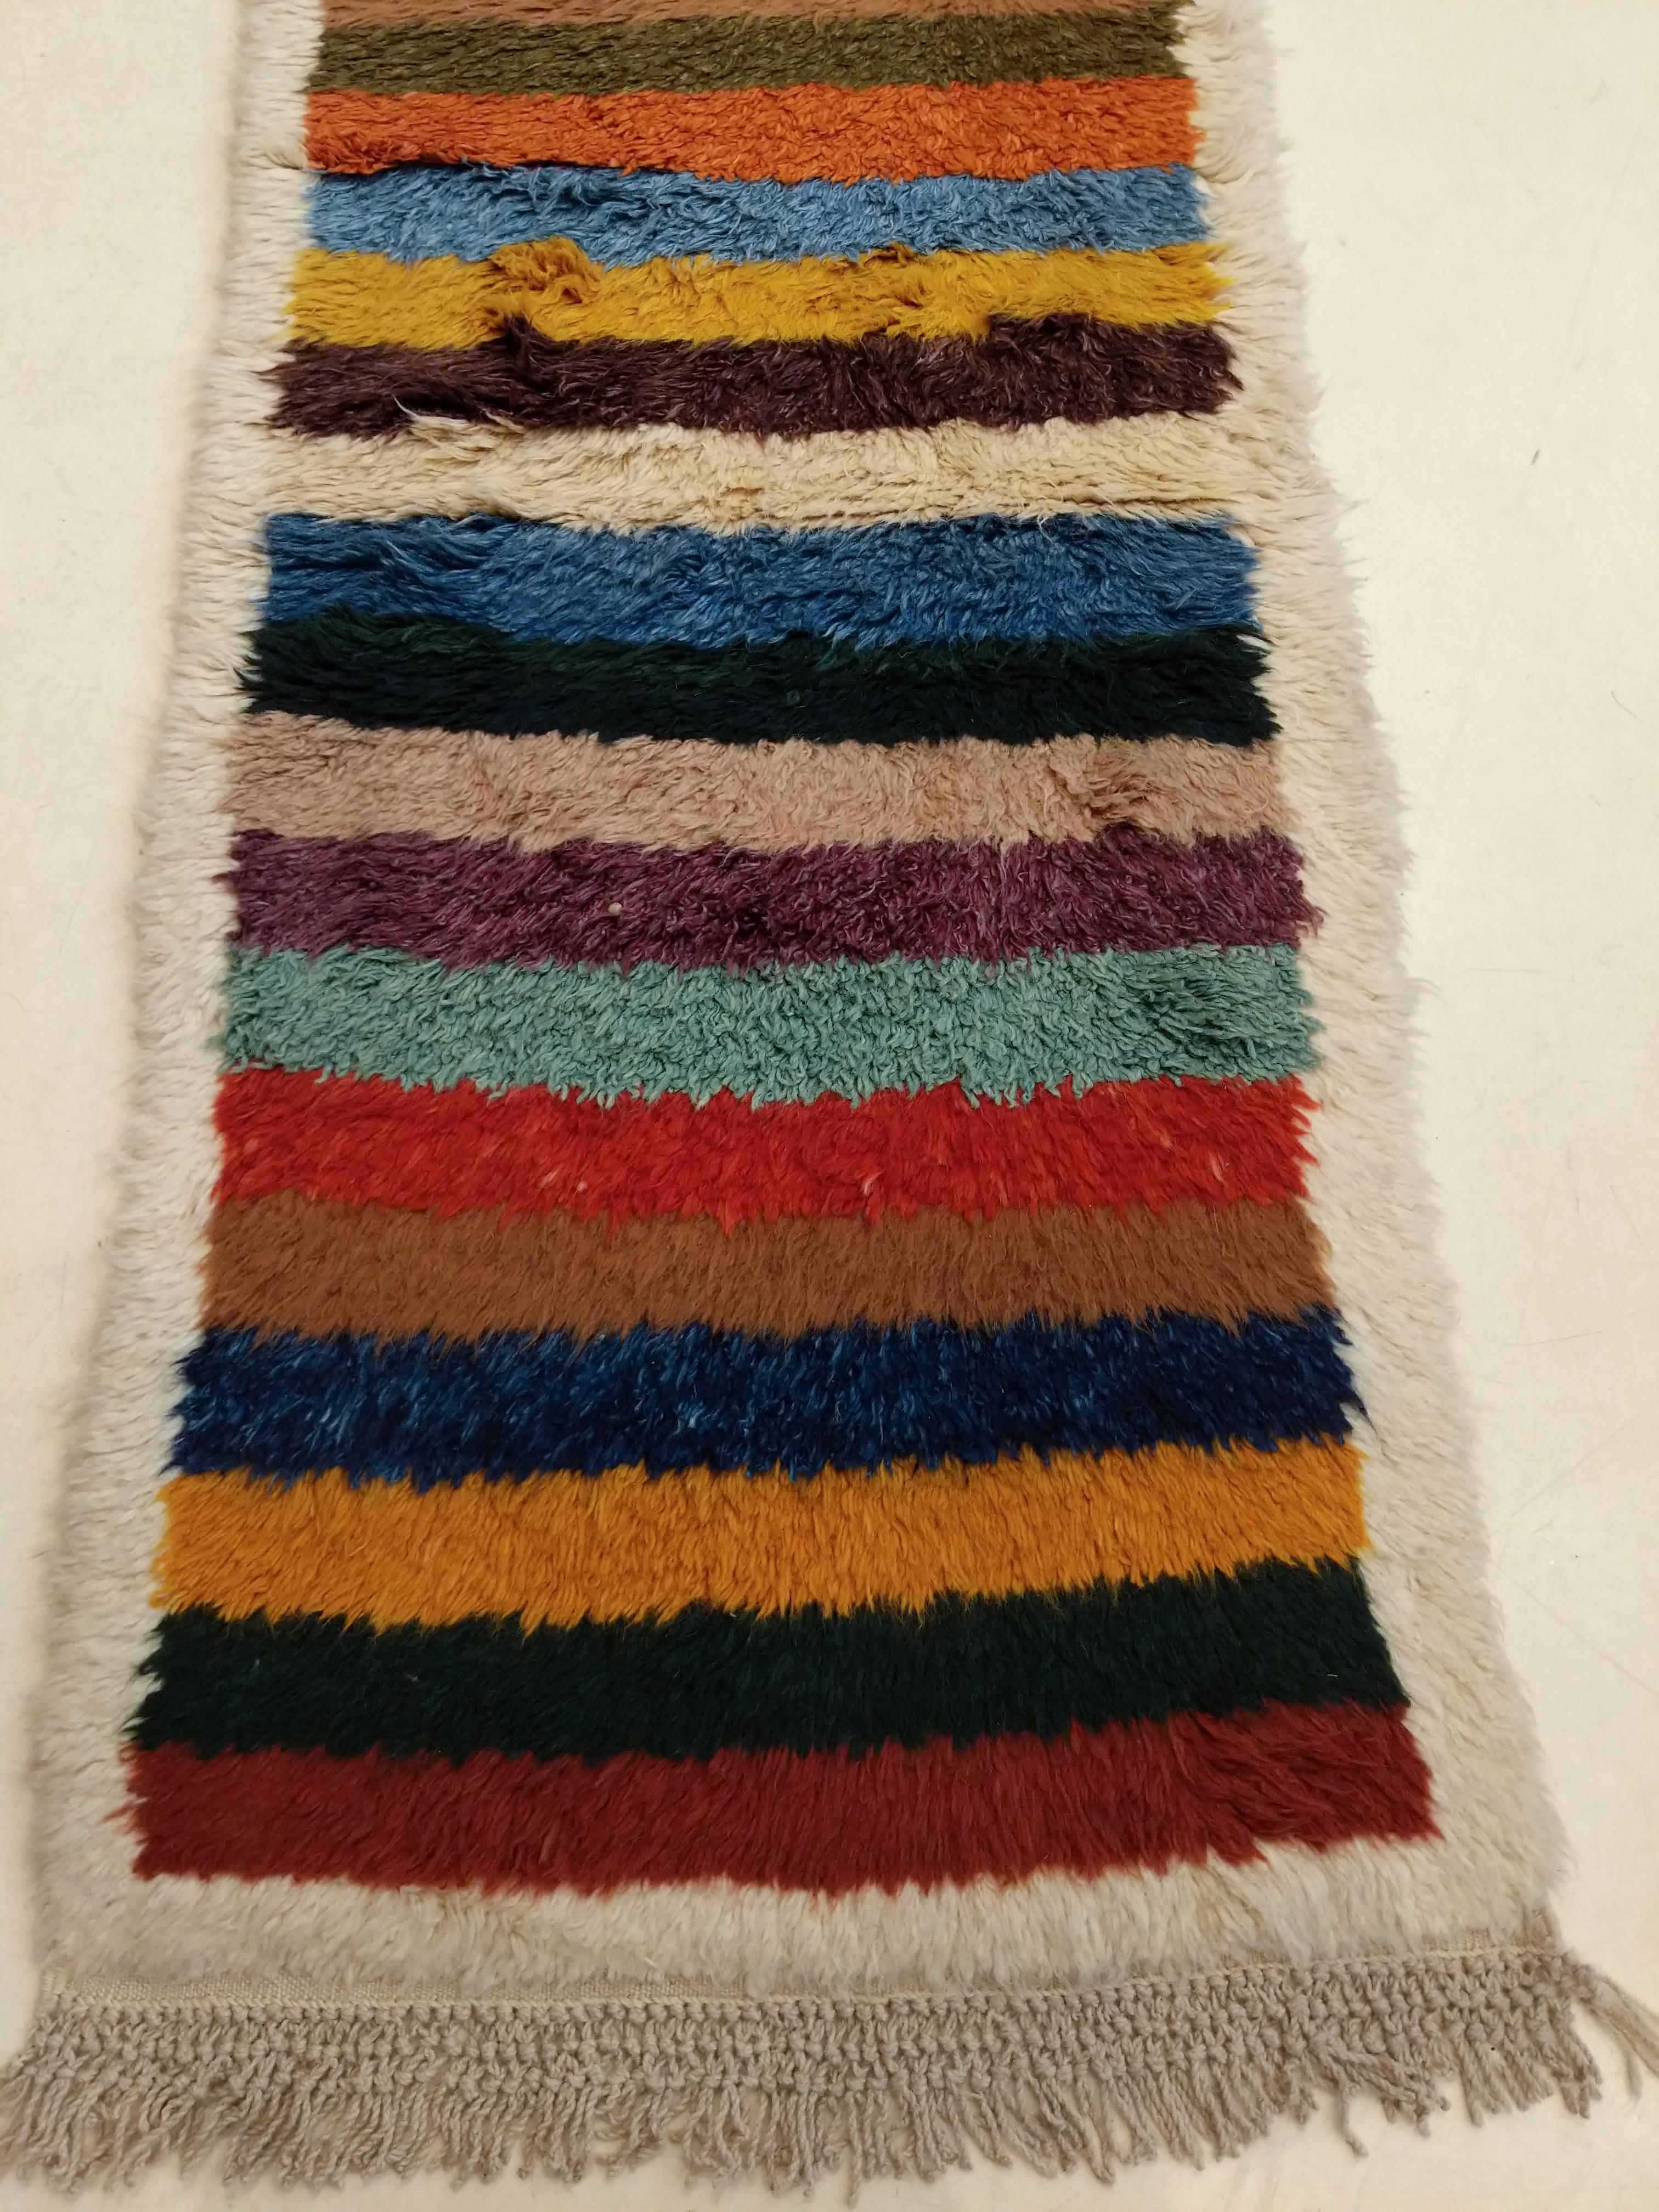 A truly spectacular runner distinguished by a plethora of colours arranged as horizontal stripes. Tulu rugs represent one of the earliest forms of nomadic pile weaving, typically knotted with a medium-high pile as they were meant as bedding rugs for